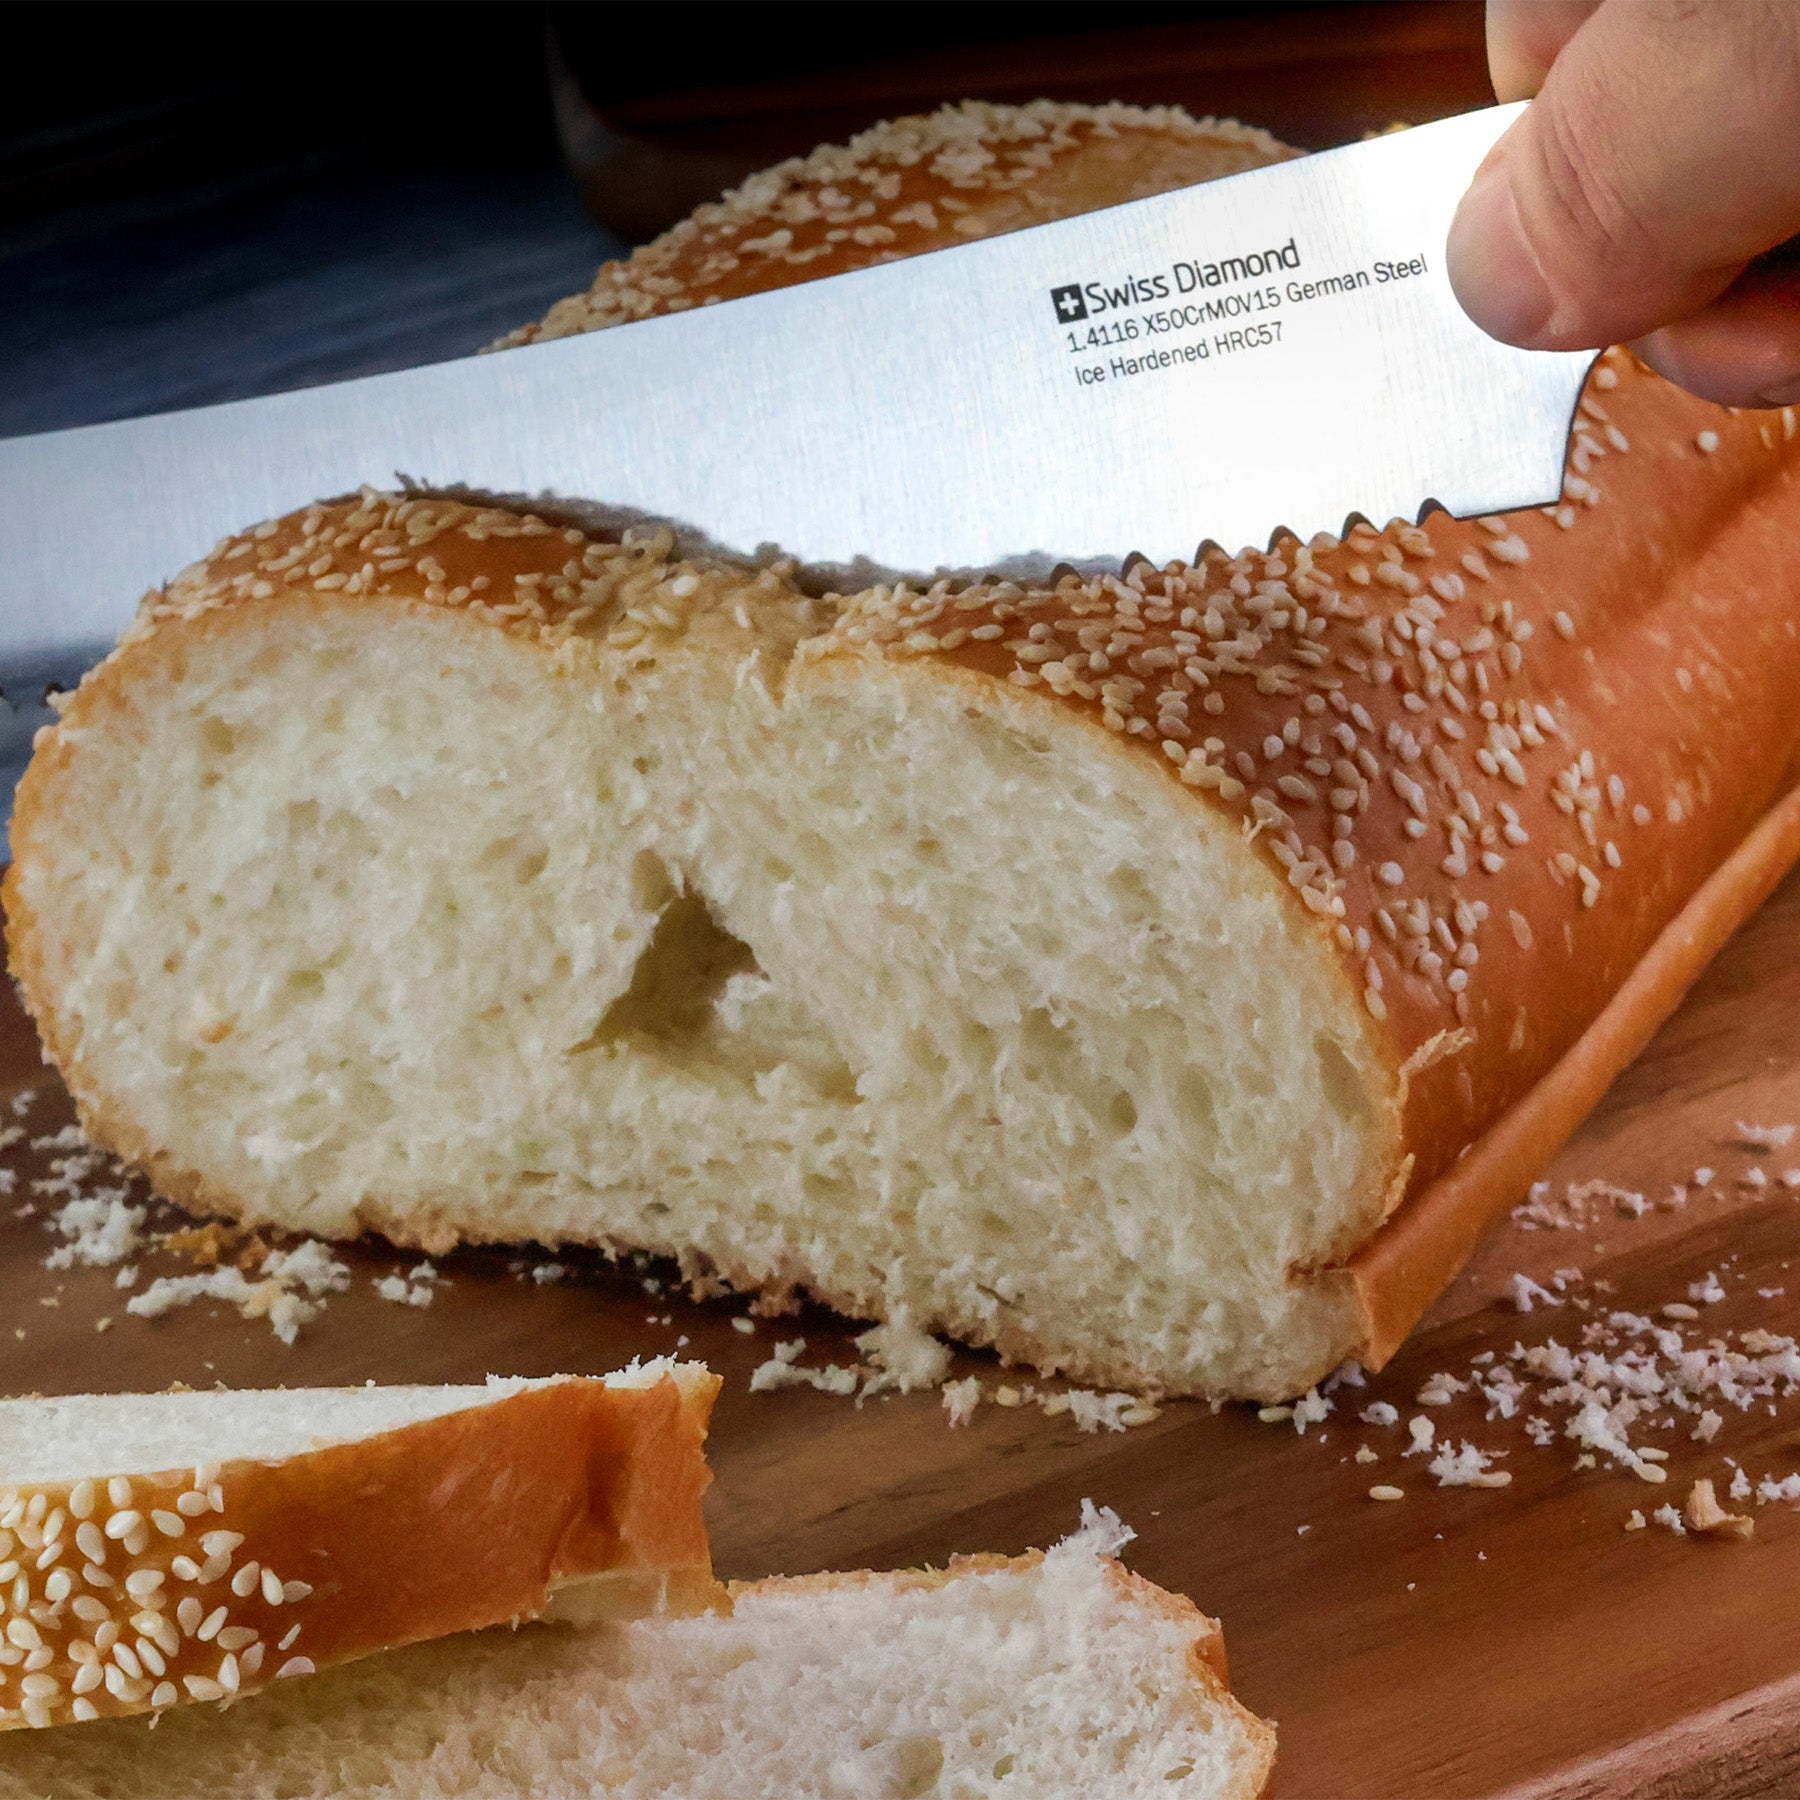 8.5" Bread Knife in use slicing through bread